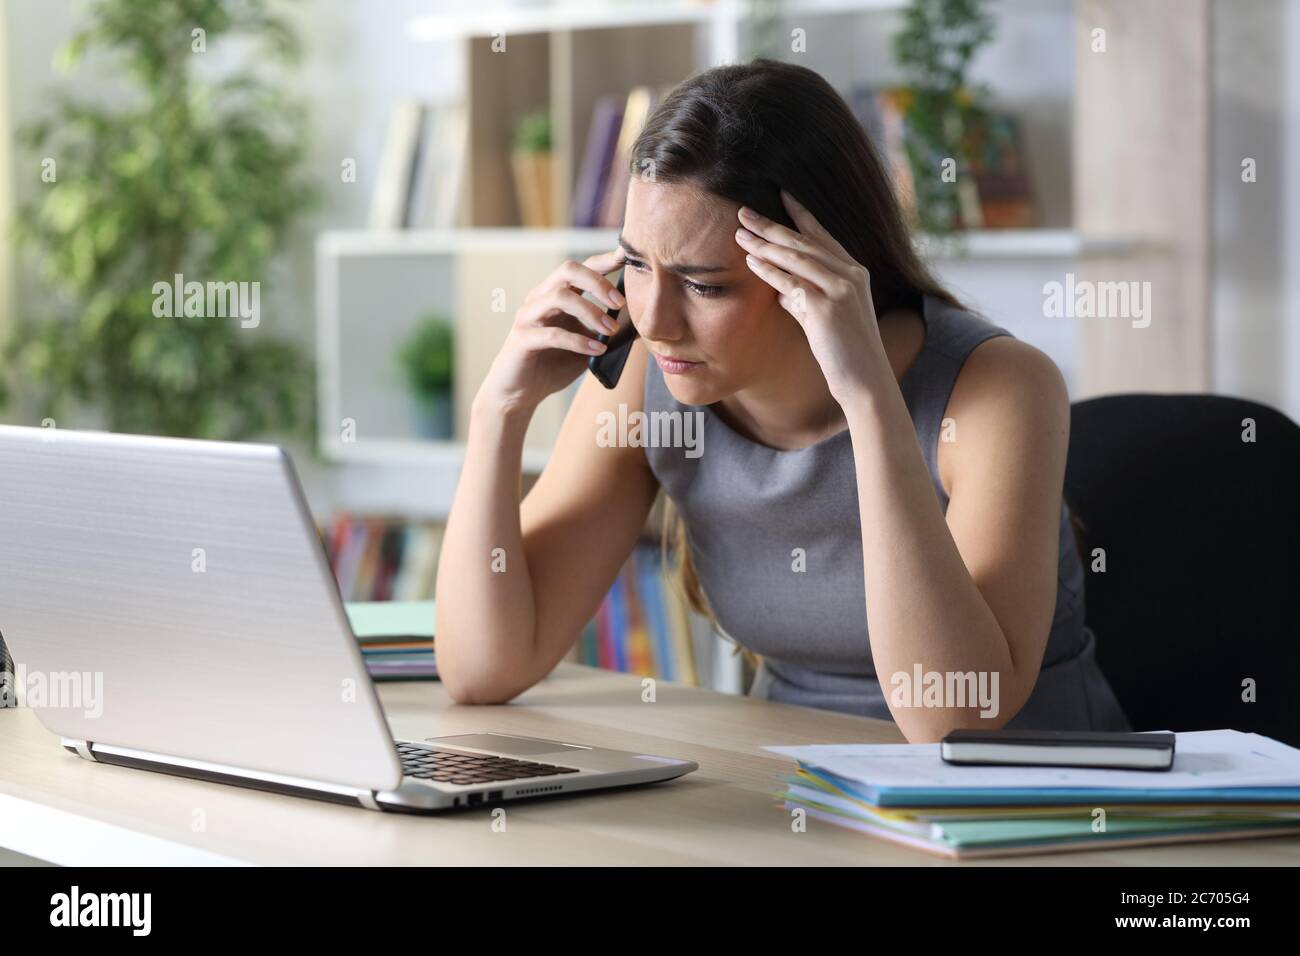 Worried entrepreneur woman calls on smart phone with laptop sitting on a desk at homeoffice Stock Photo